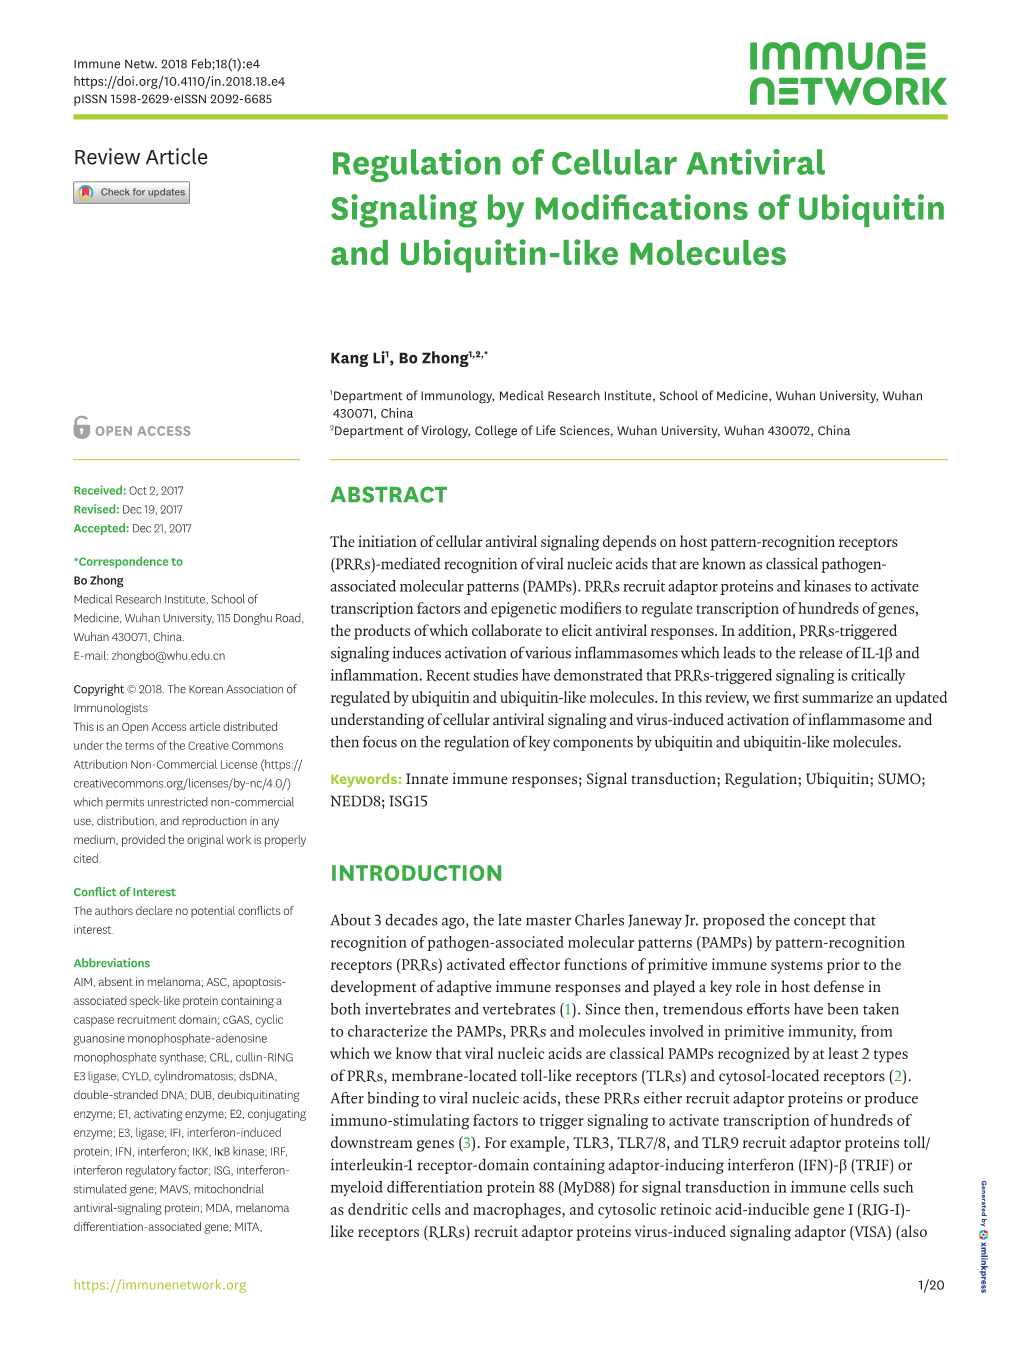 Regulation of Cellular Antiviral Signaling by Modifications of Ubiquitin and Ubiquitin-Like Molecules